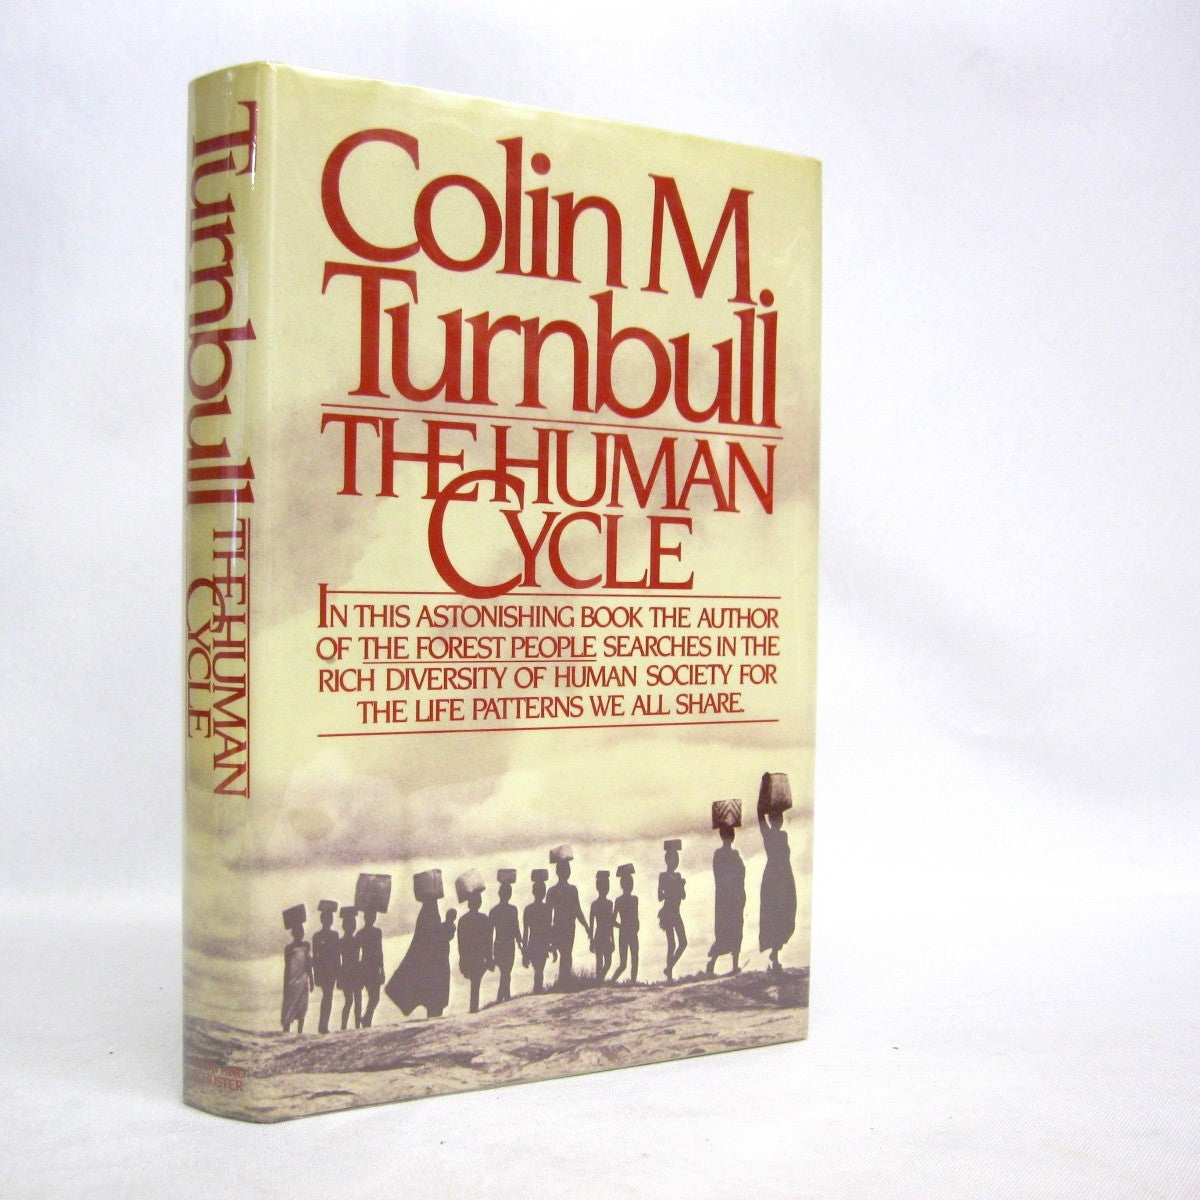 The Human Cycle by Colin M Turnbull